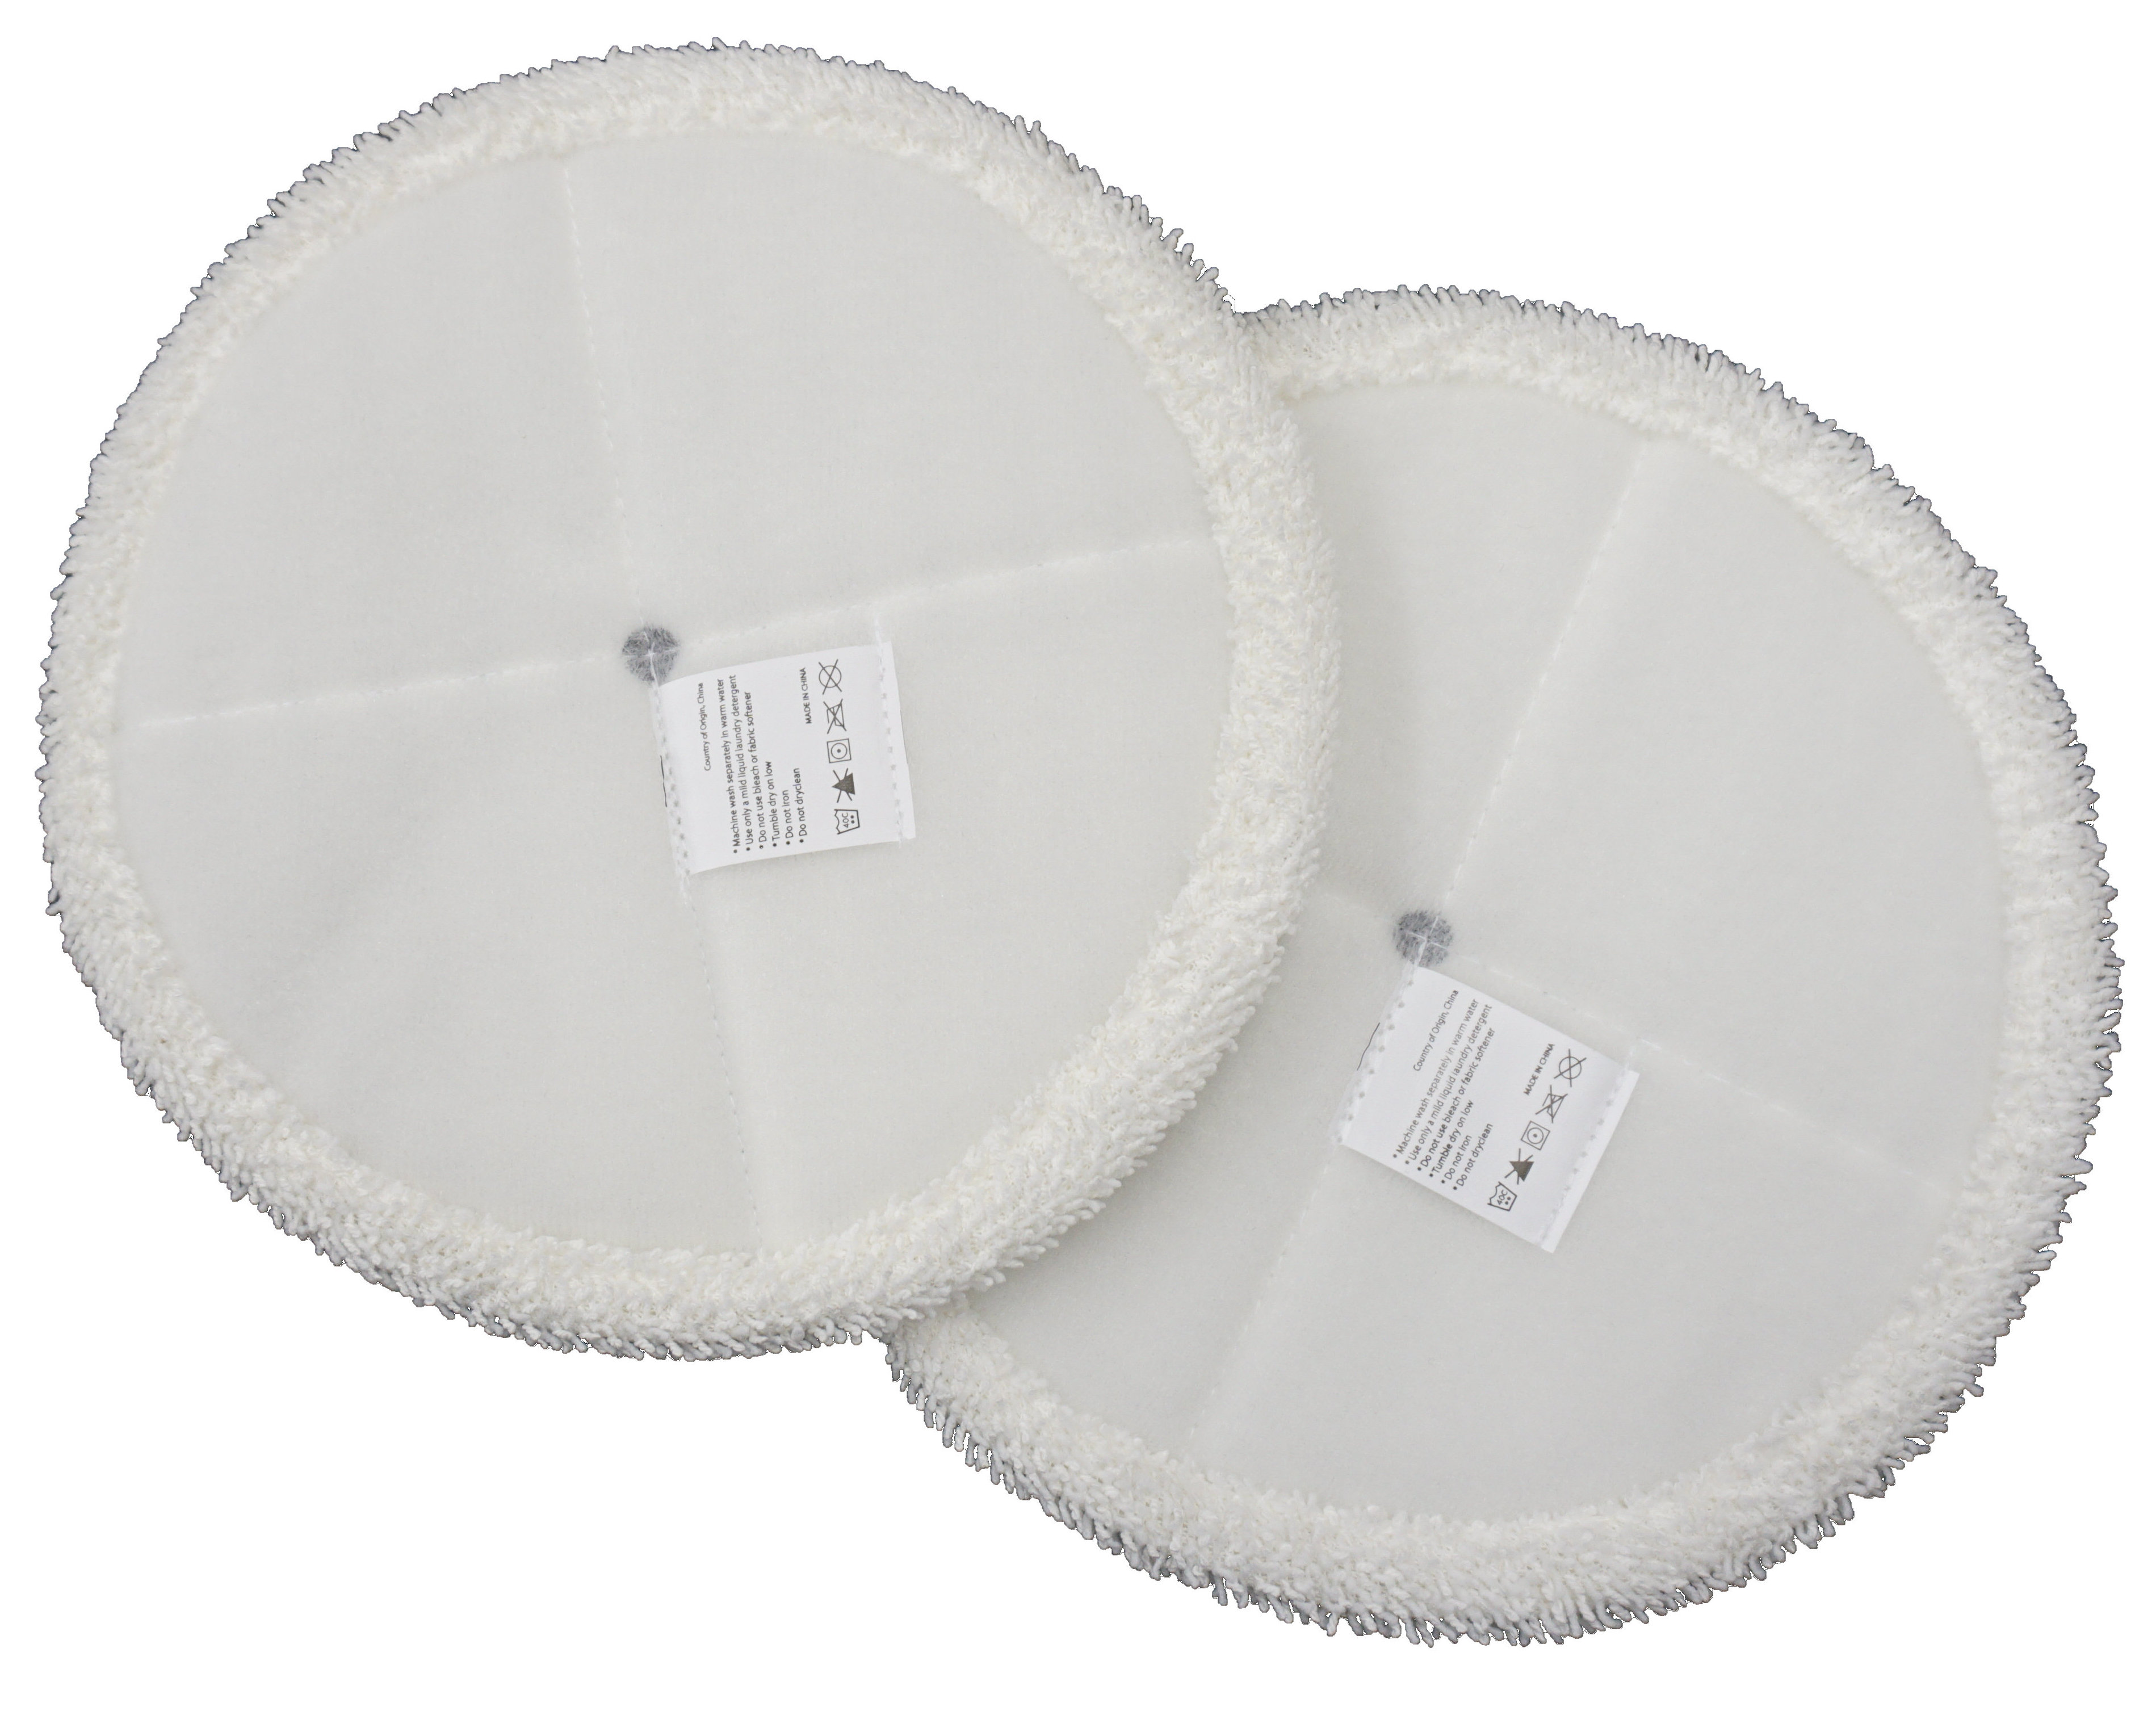 Bissell Scrubby Mop Pads, 2 Pk, for Spinwave Hard Floor Spin Mop, 1611298 - image 2 of 2